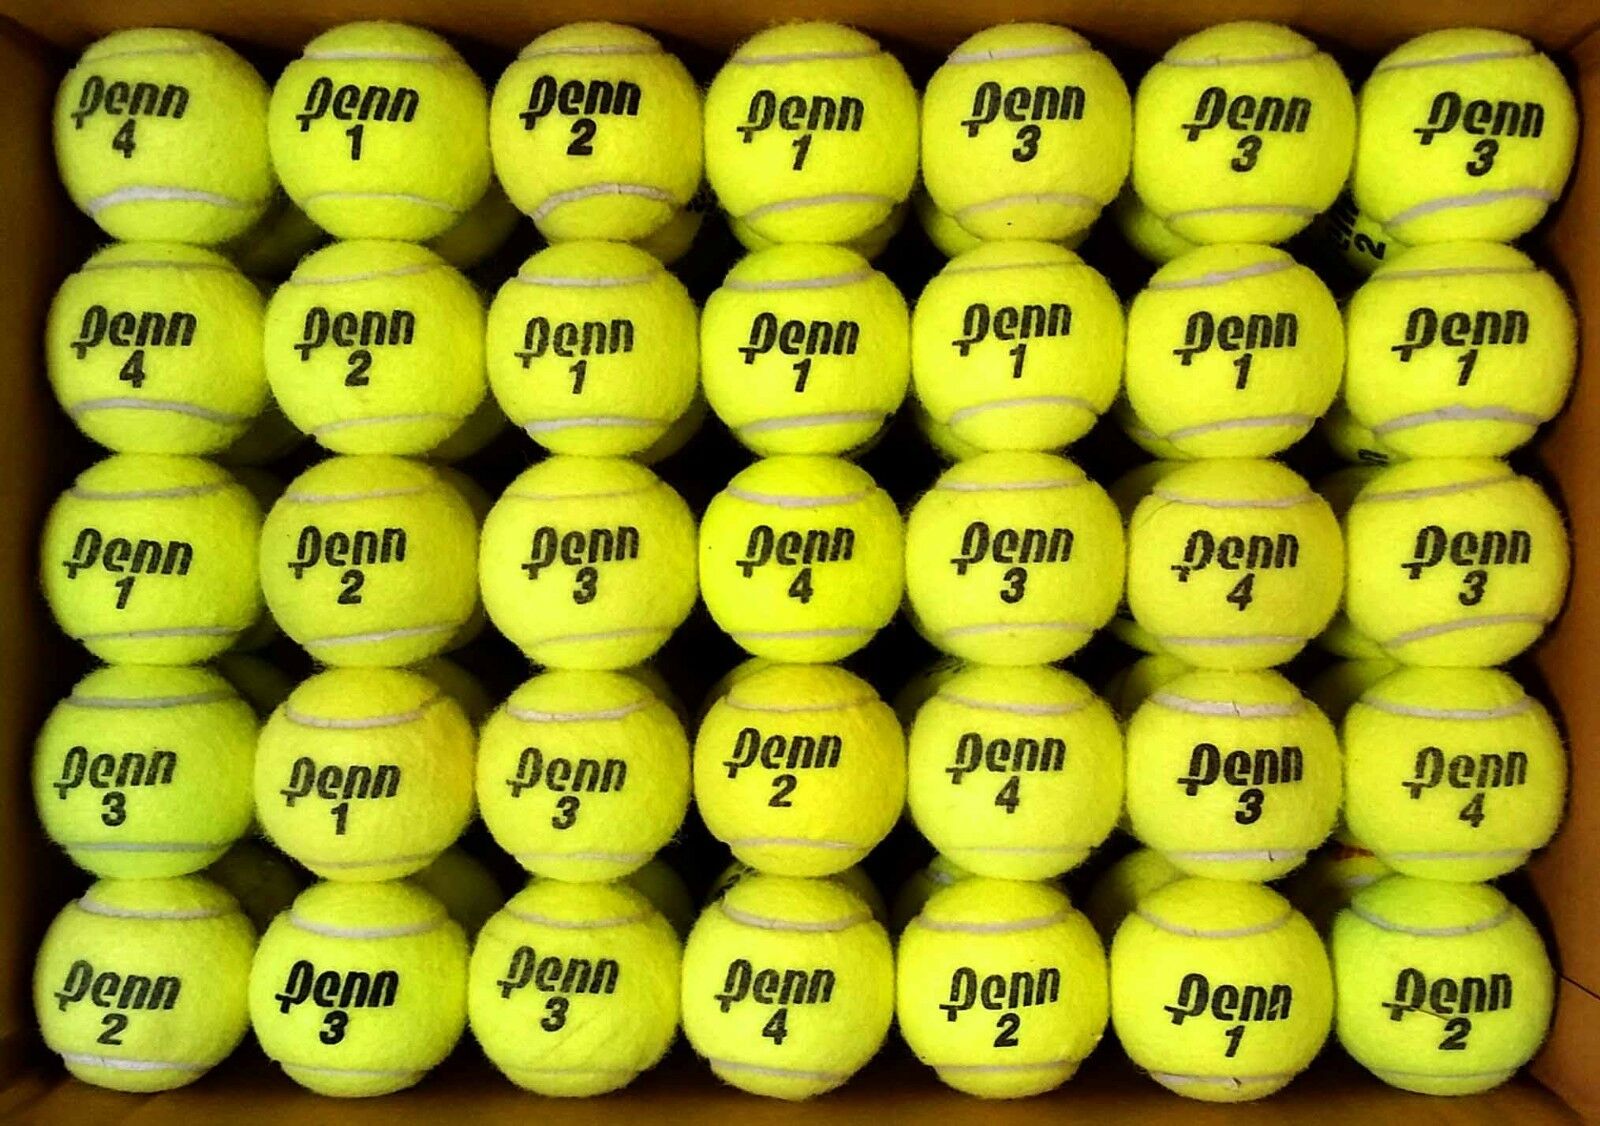 100 Used Tennis Balls Free Ship & Free Recycling Support Recycleballs Nonprofit